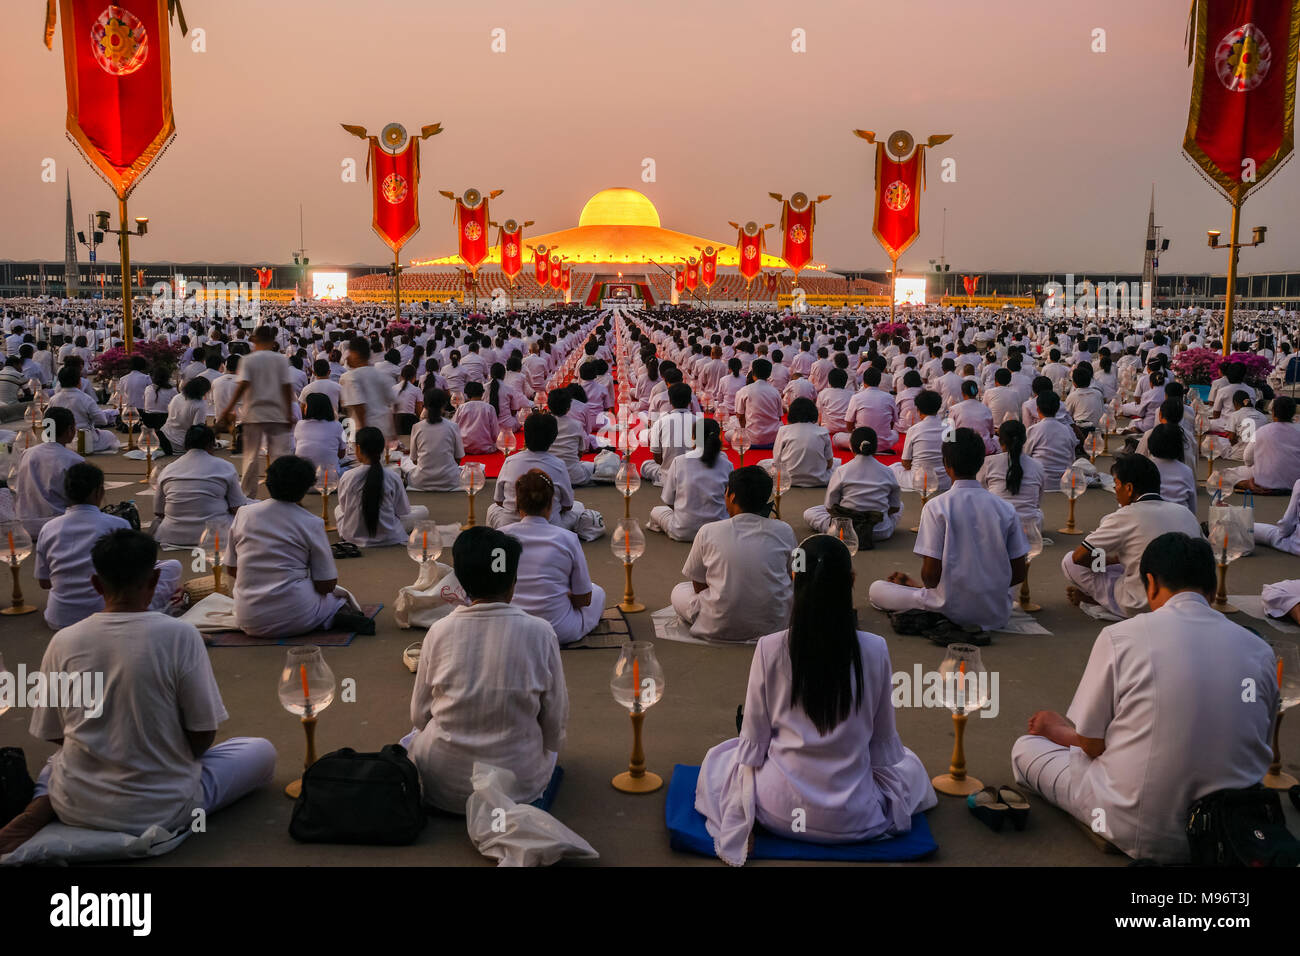 Pathumthani, Thailand - March 4, 2015: Many Buddhists doing meditation in front of Dhammakaya Cetiya in Dhammakaya temple of Pathumthani, Thailand Stock Photo